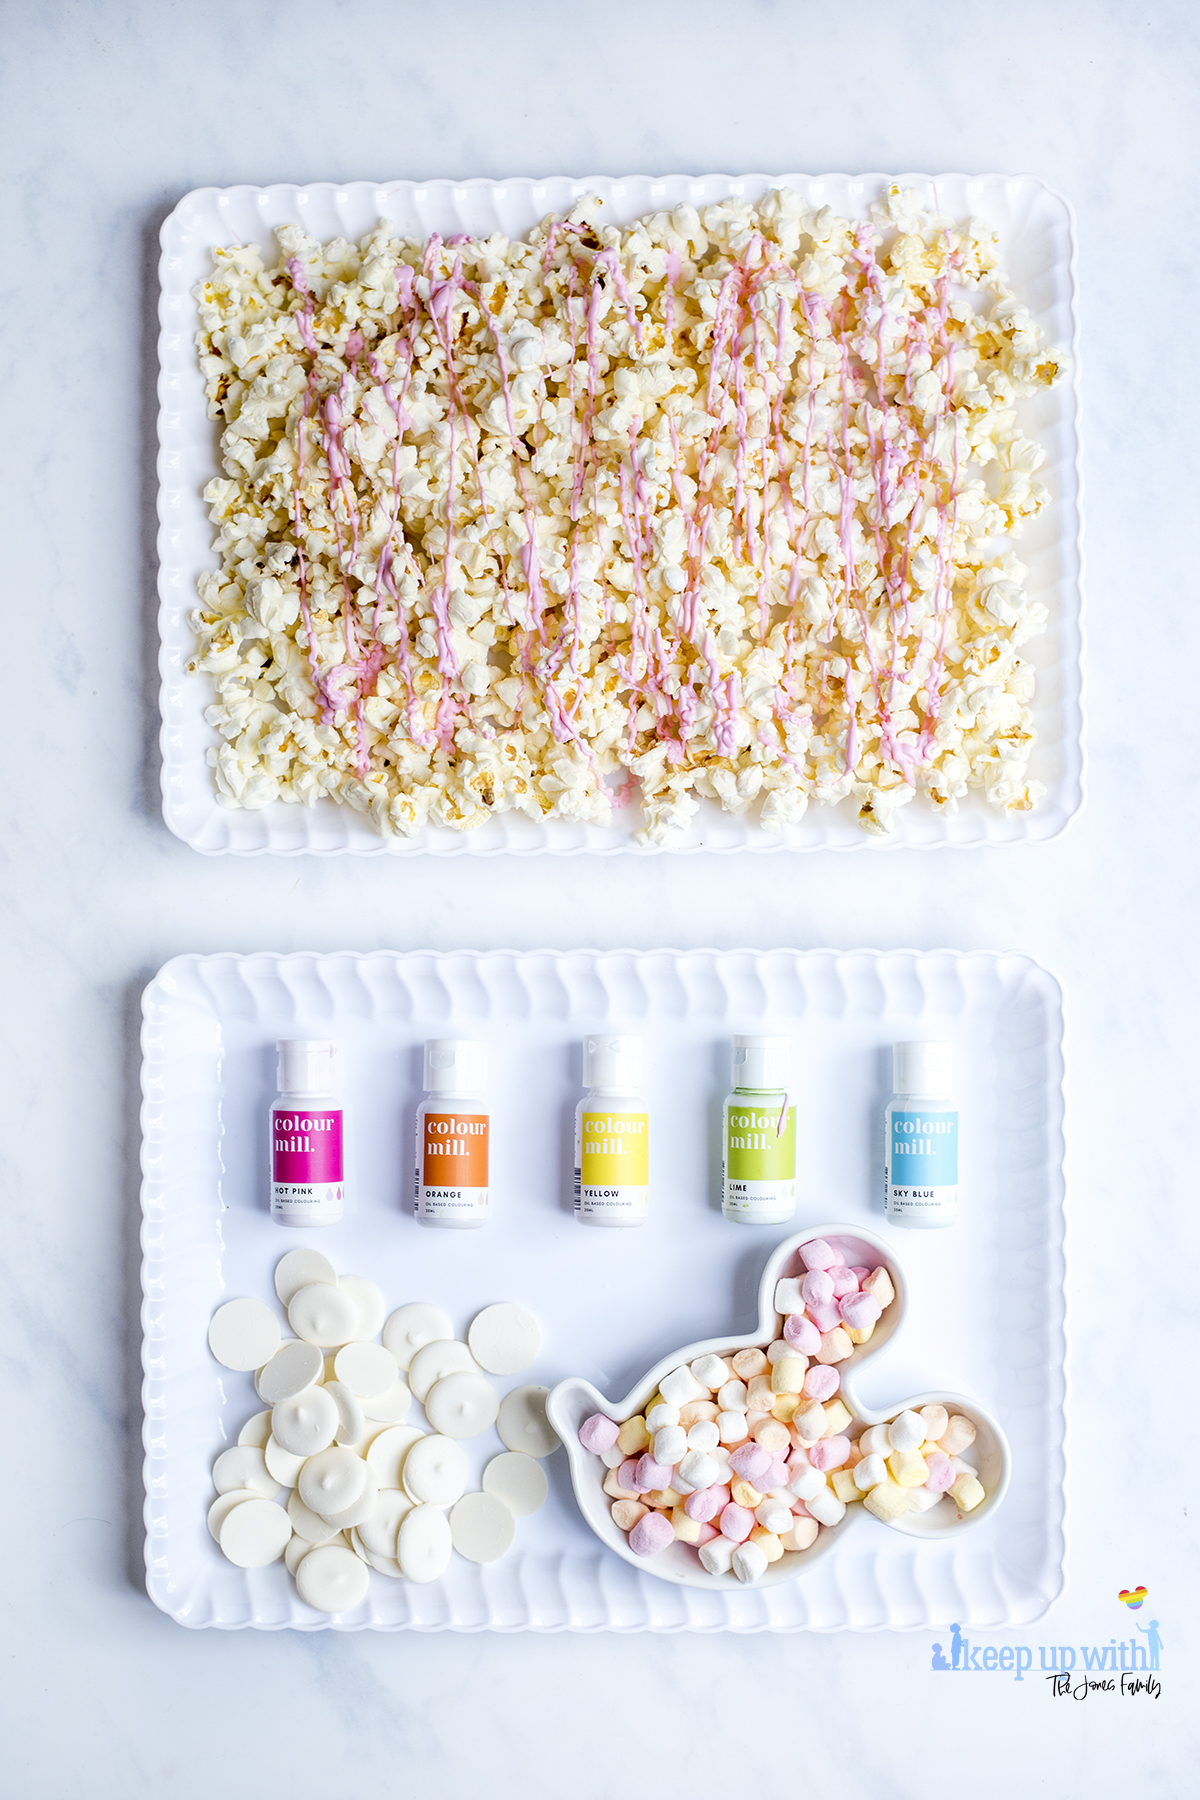 Image shows the ingredients used to make Mermaid Popcorn. Popcorn, spread evenly into a white scalloped tray, which has been coated in drizzled pink candy melts, a pile of bright white candy melts, a mickey mouse shaped bowl of mini marshmallows and oil based food colourings from Colour Mill. Image by Sara-Jayne from keep Up With the Jones family.